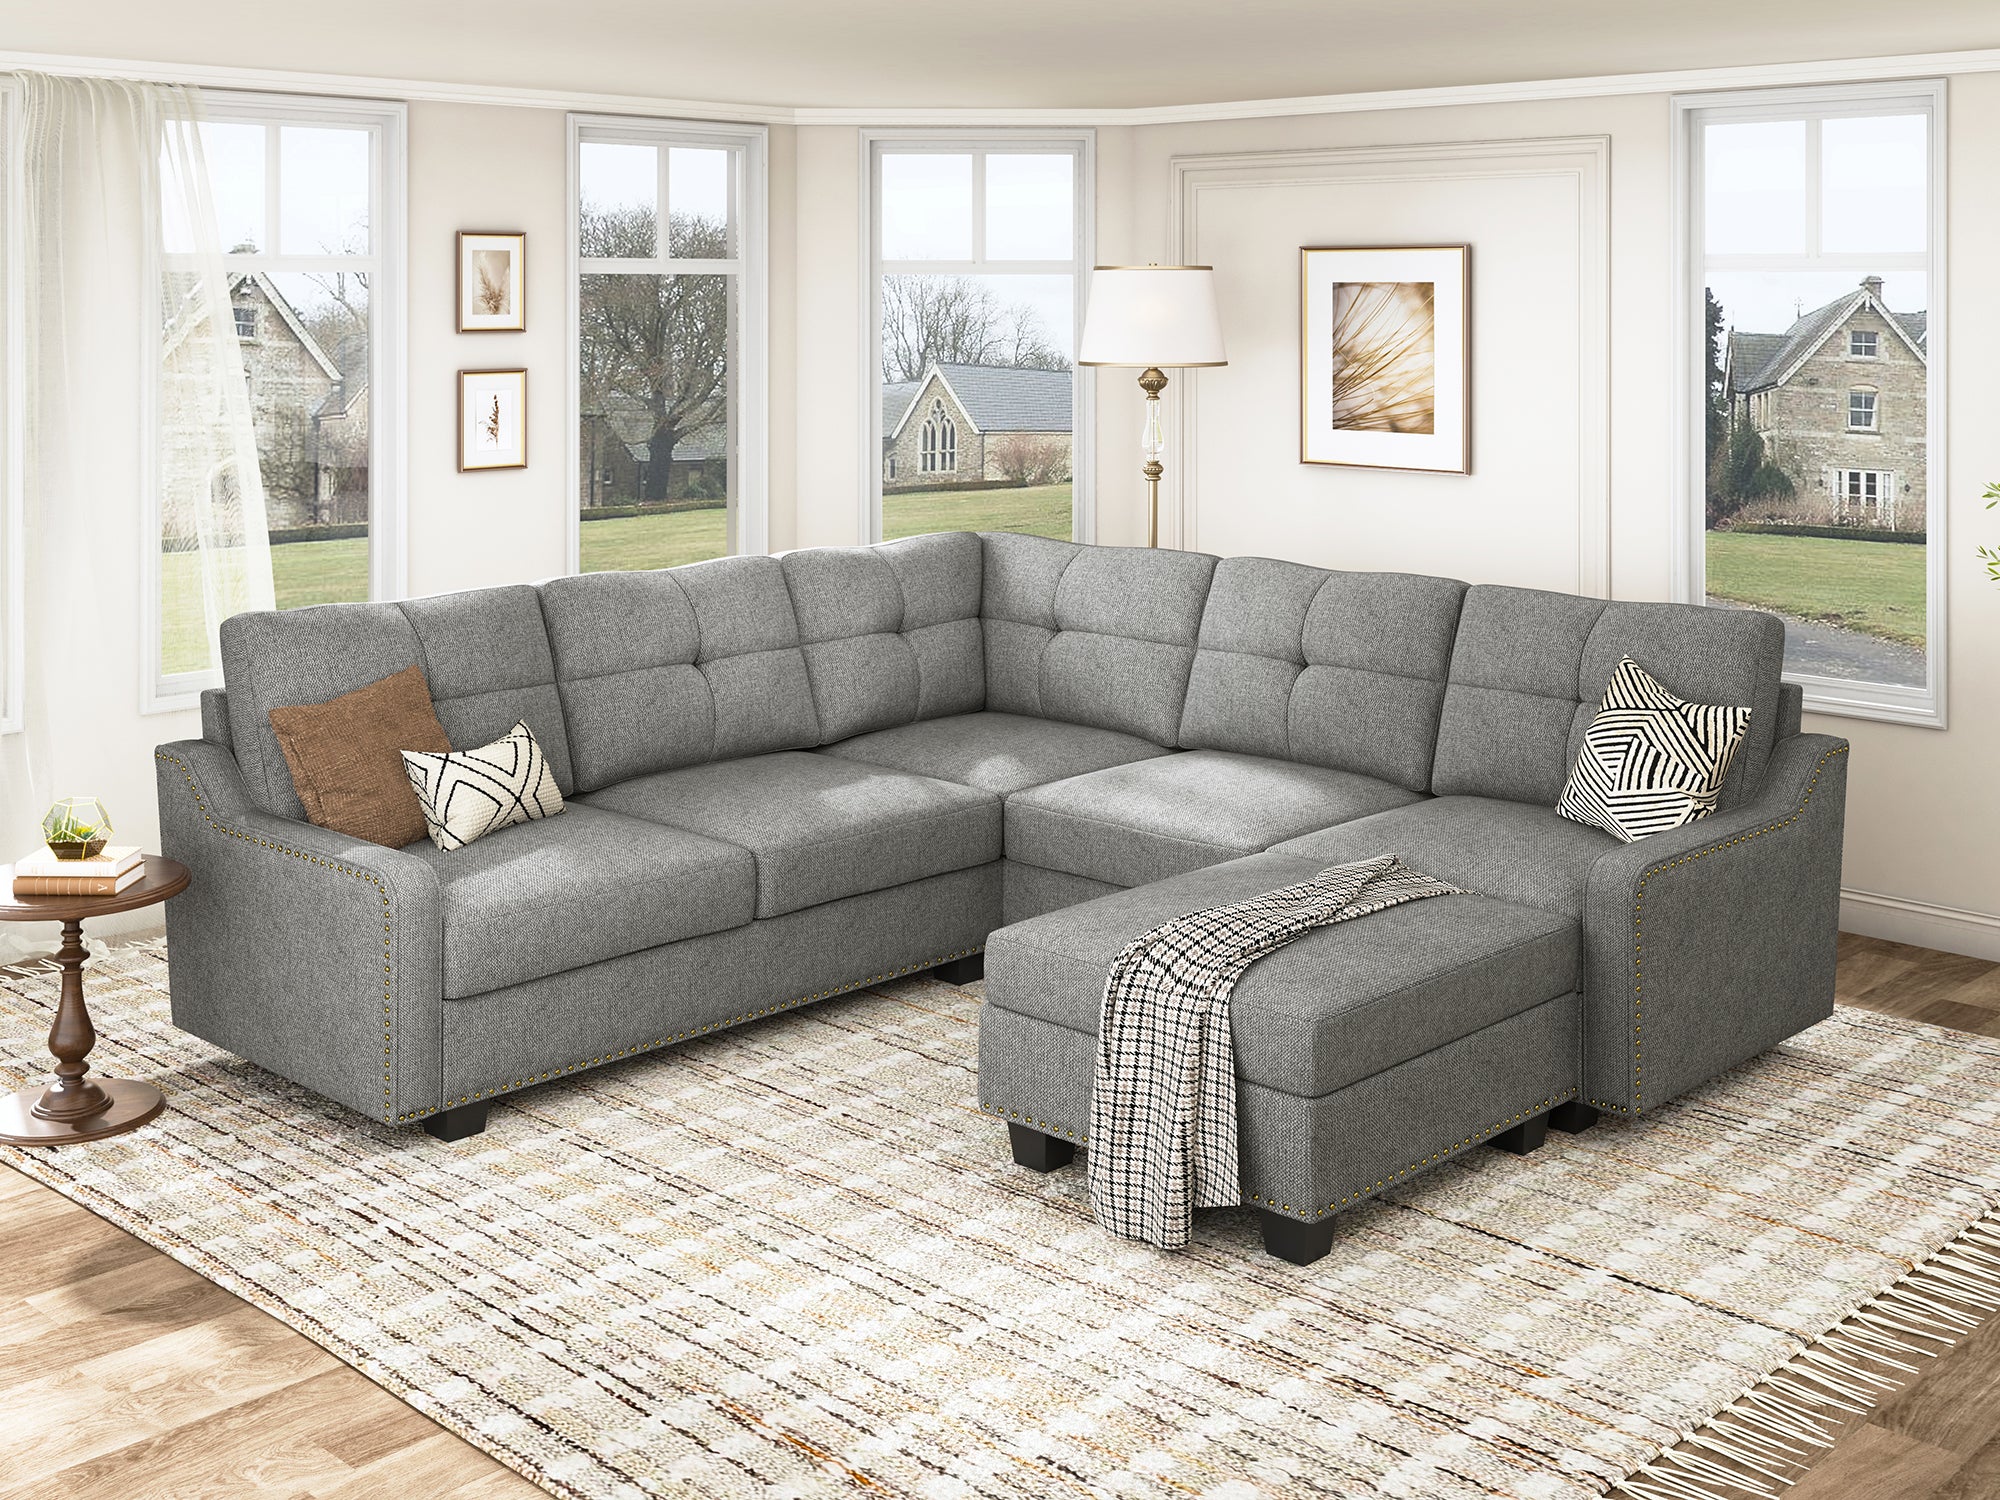 HONBAY 5-Seat L-Shaped Sectional Corner Sofa with Storage Ottoman